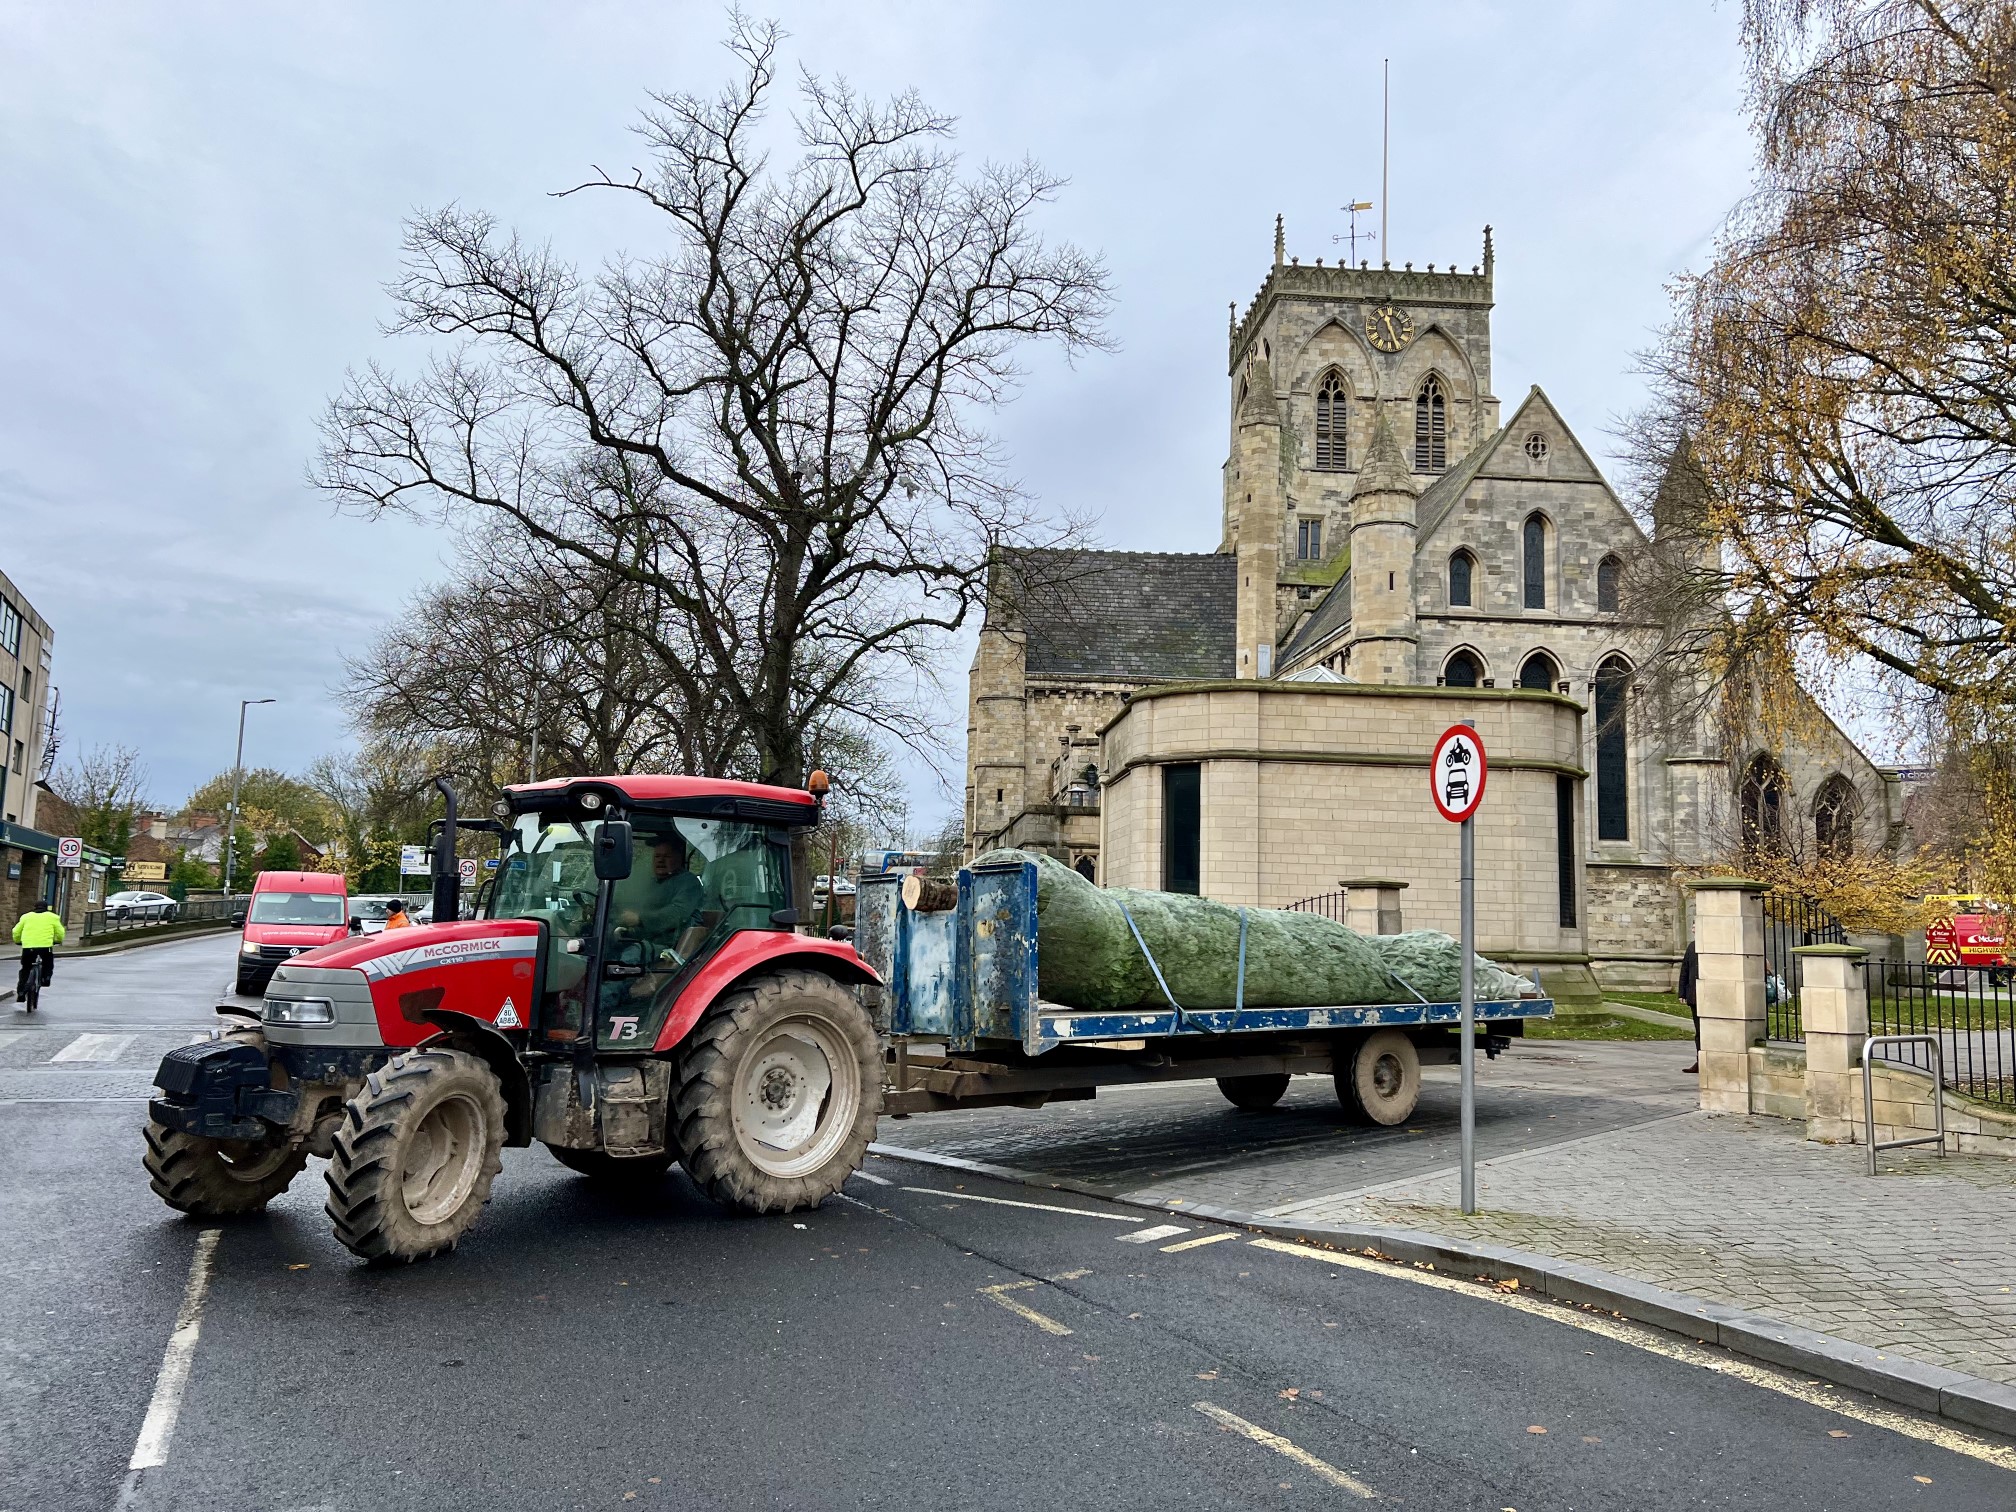 The tree arrives in Grimsby on the back of a tractor